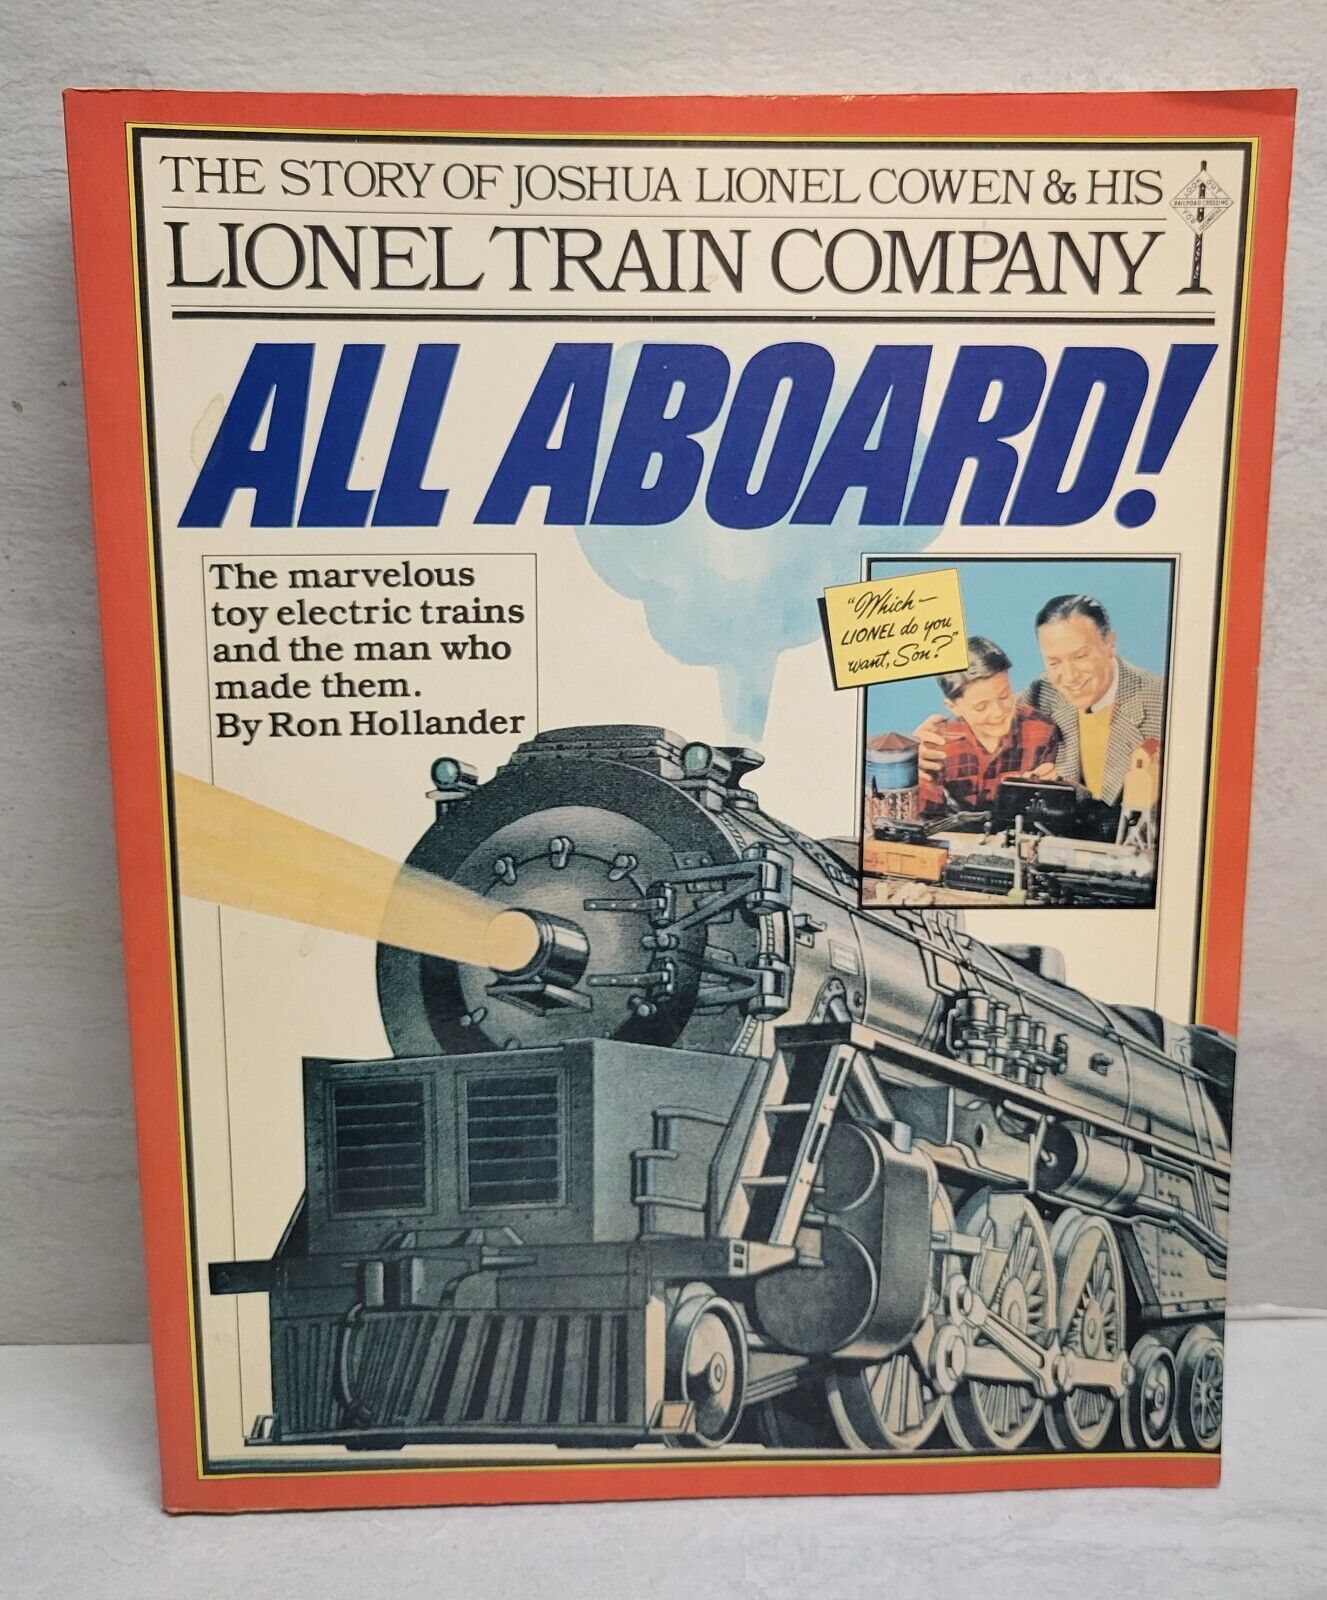 LIONEL ALL ABOARD The Story Of Joshua Lionel Cohen (Soft Cover, 1981)